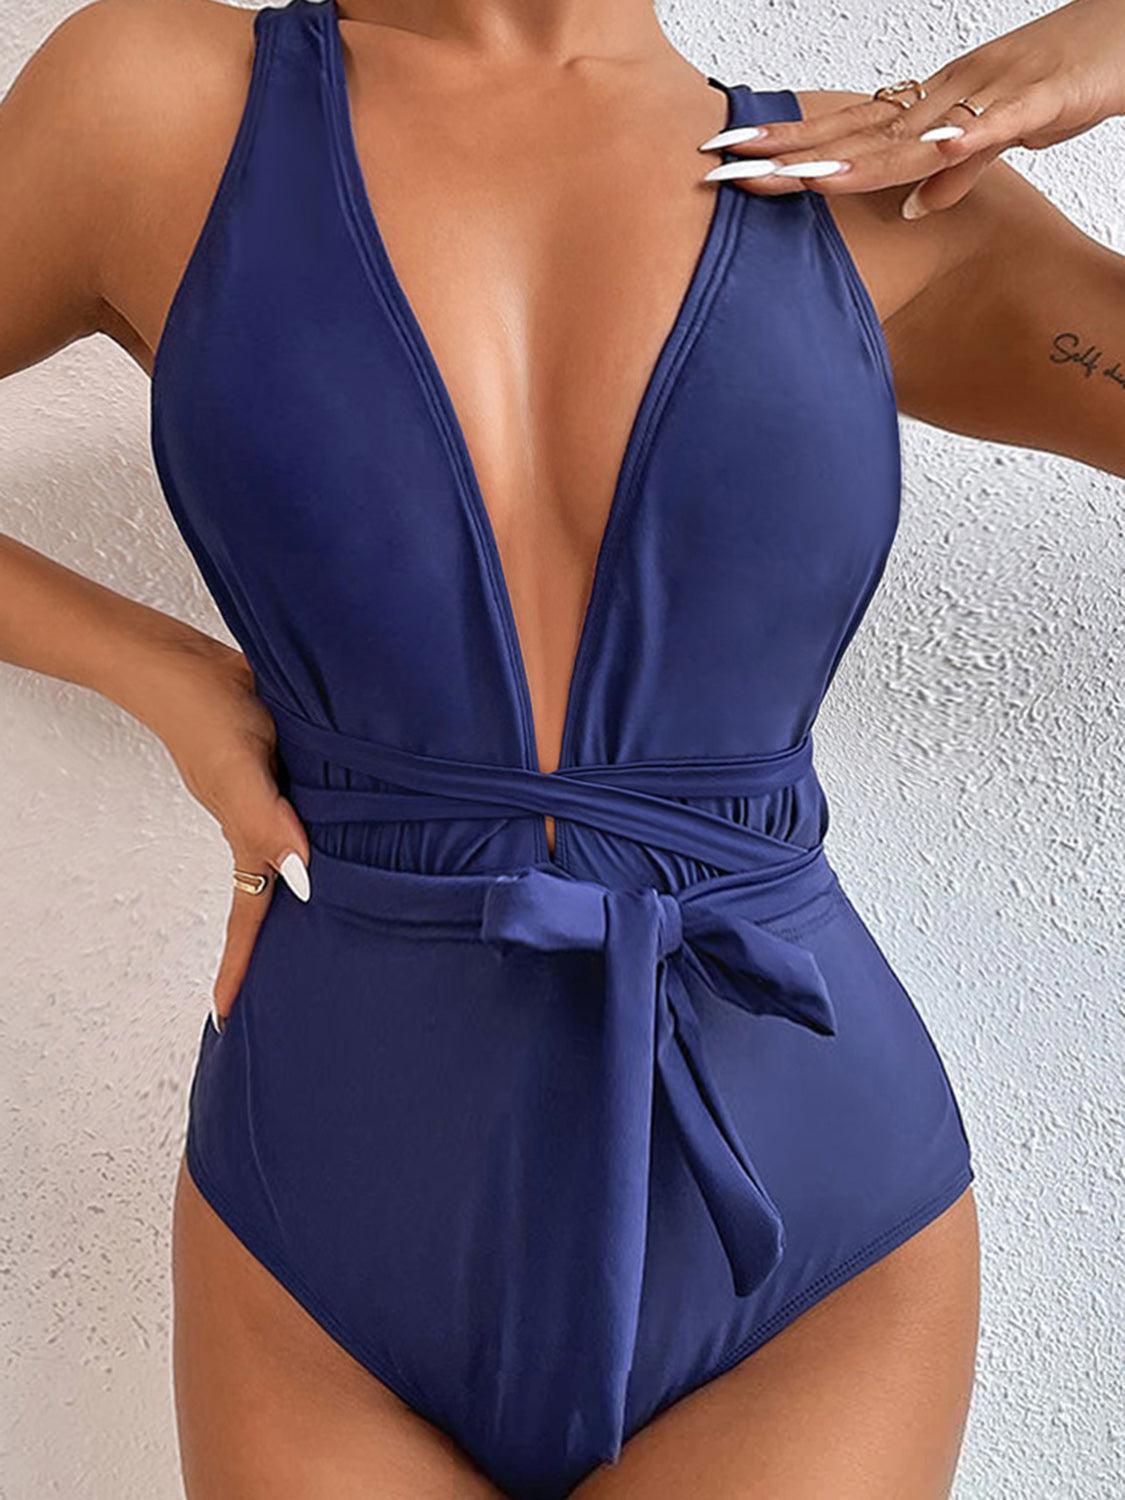 a woman in a blue one piece swimsuit